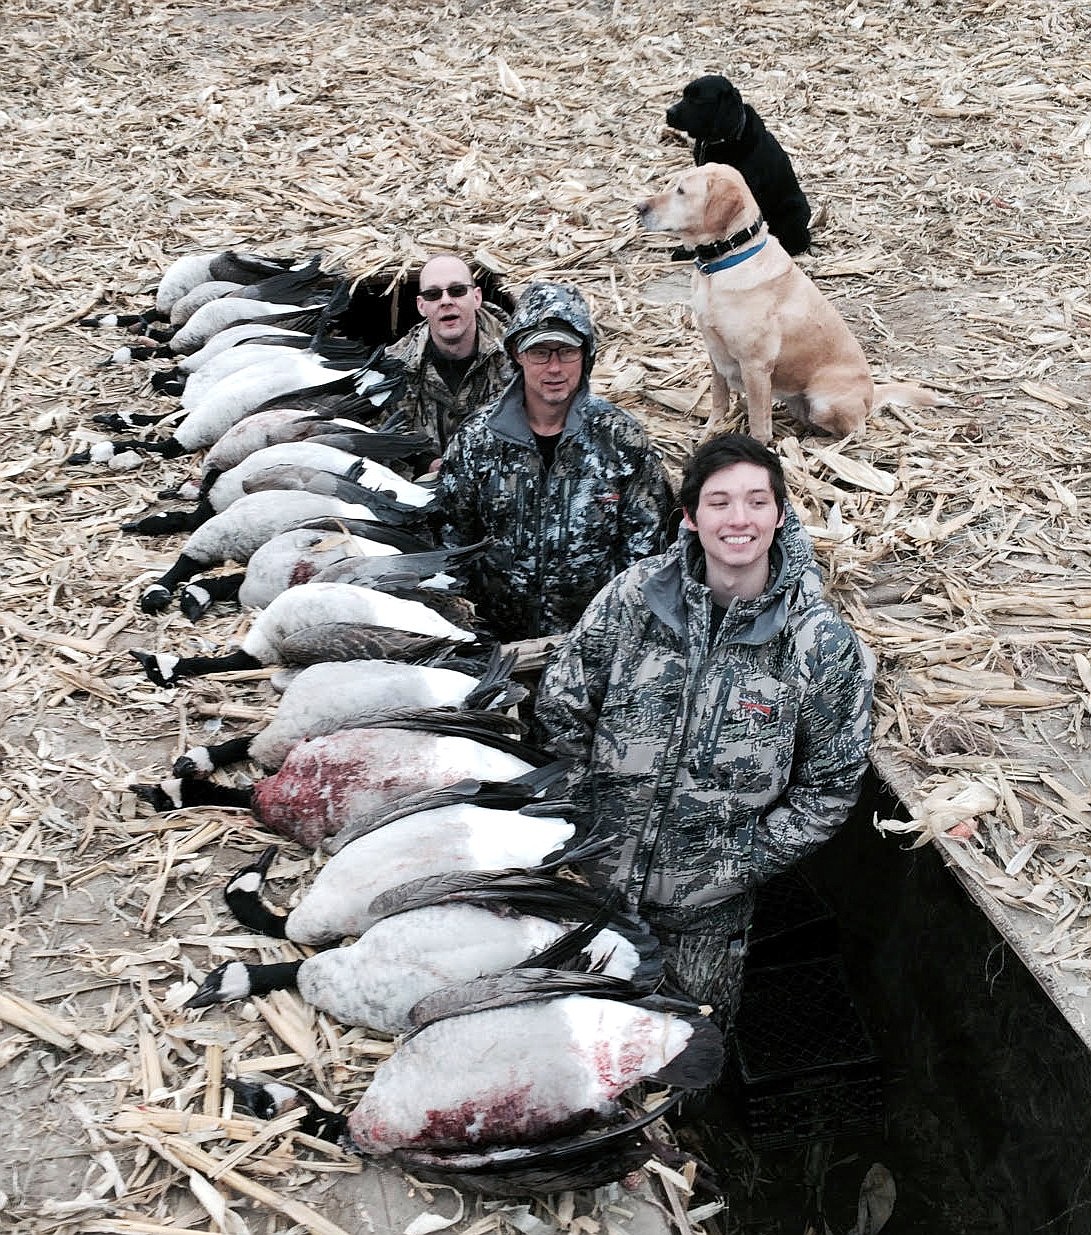 Pete Fisher photo - The Brock Strickland party form Marysville after a successful guided goose hunt with Levi Meseberg of MarDon Resort.